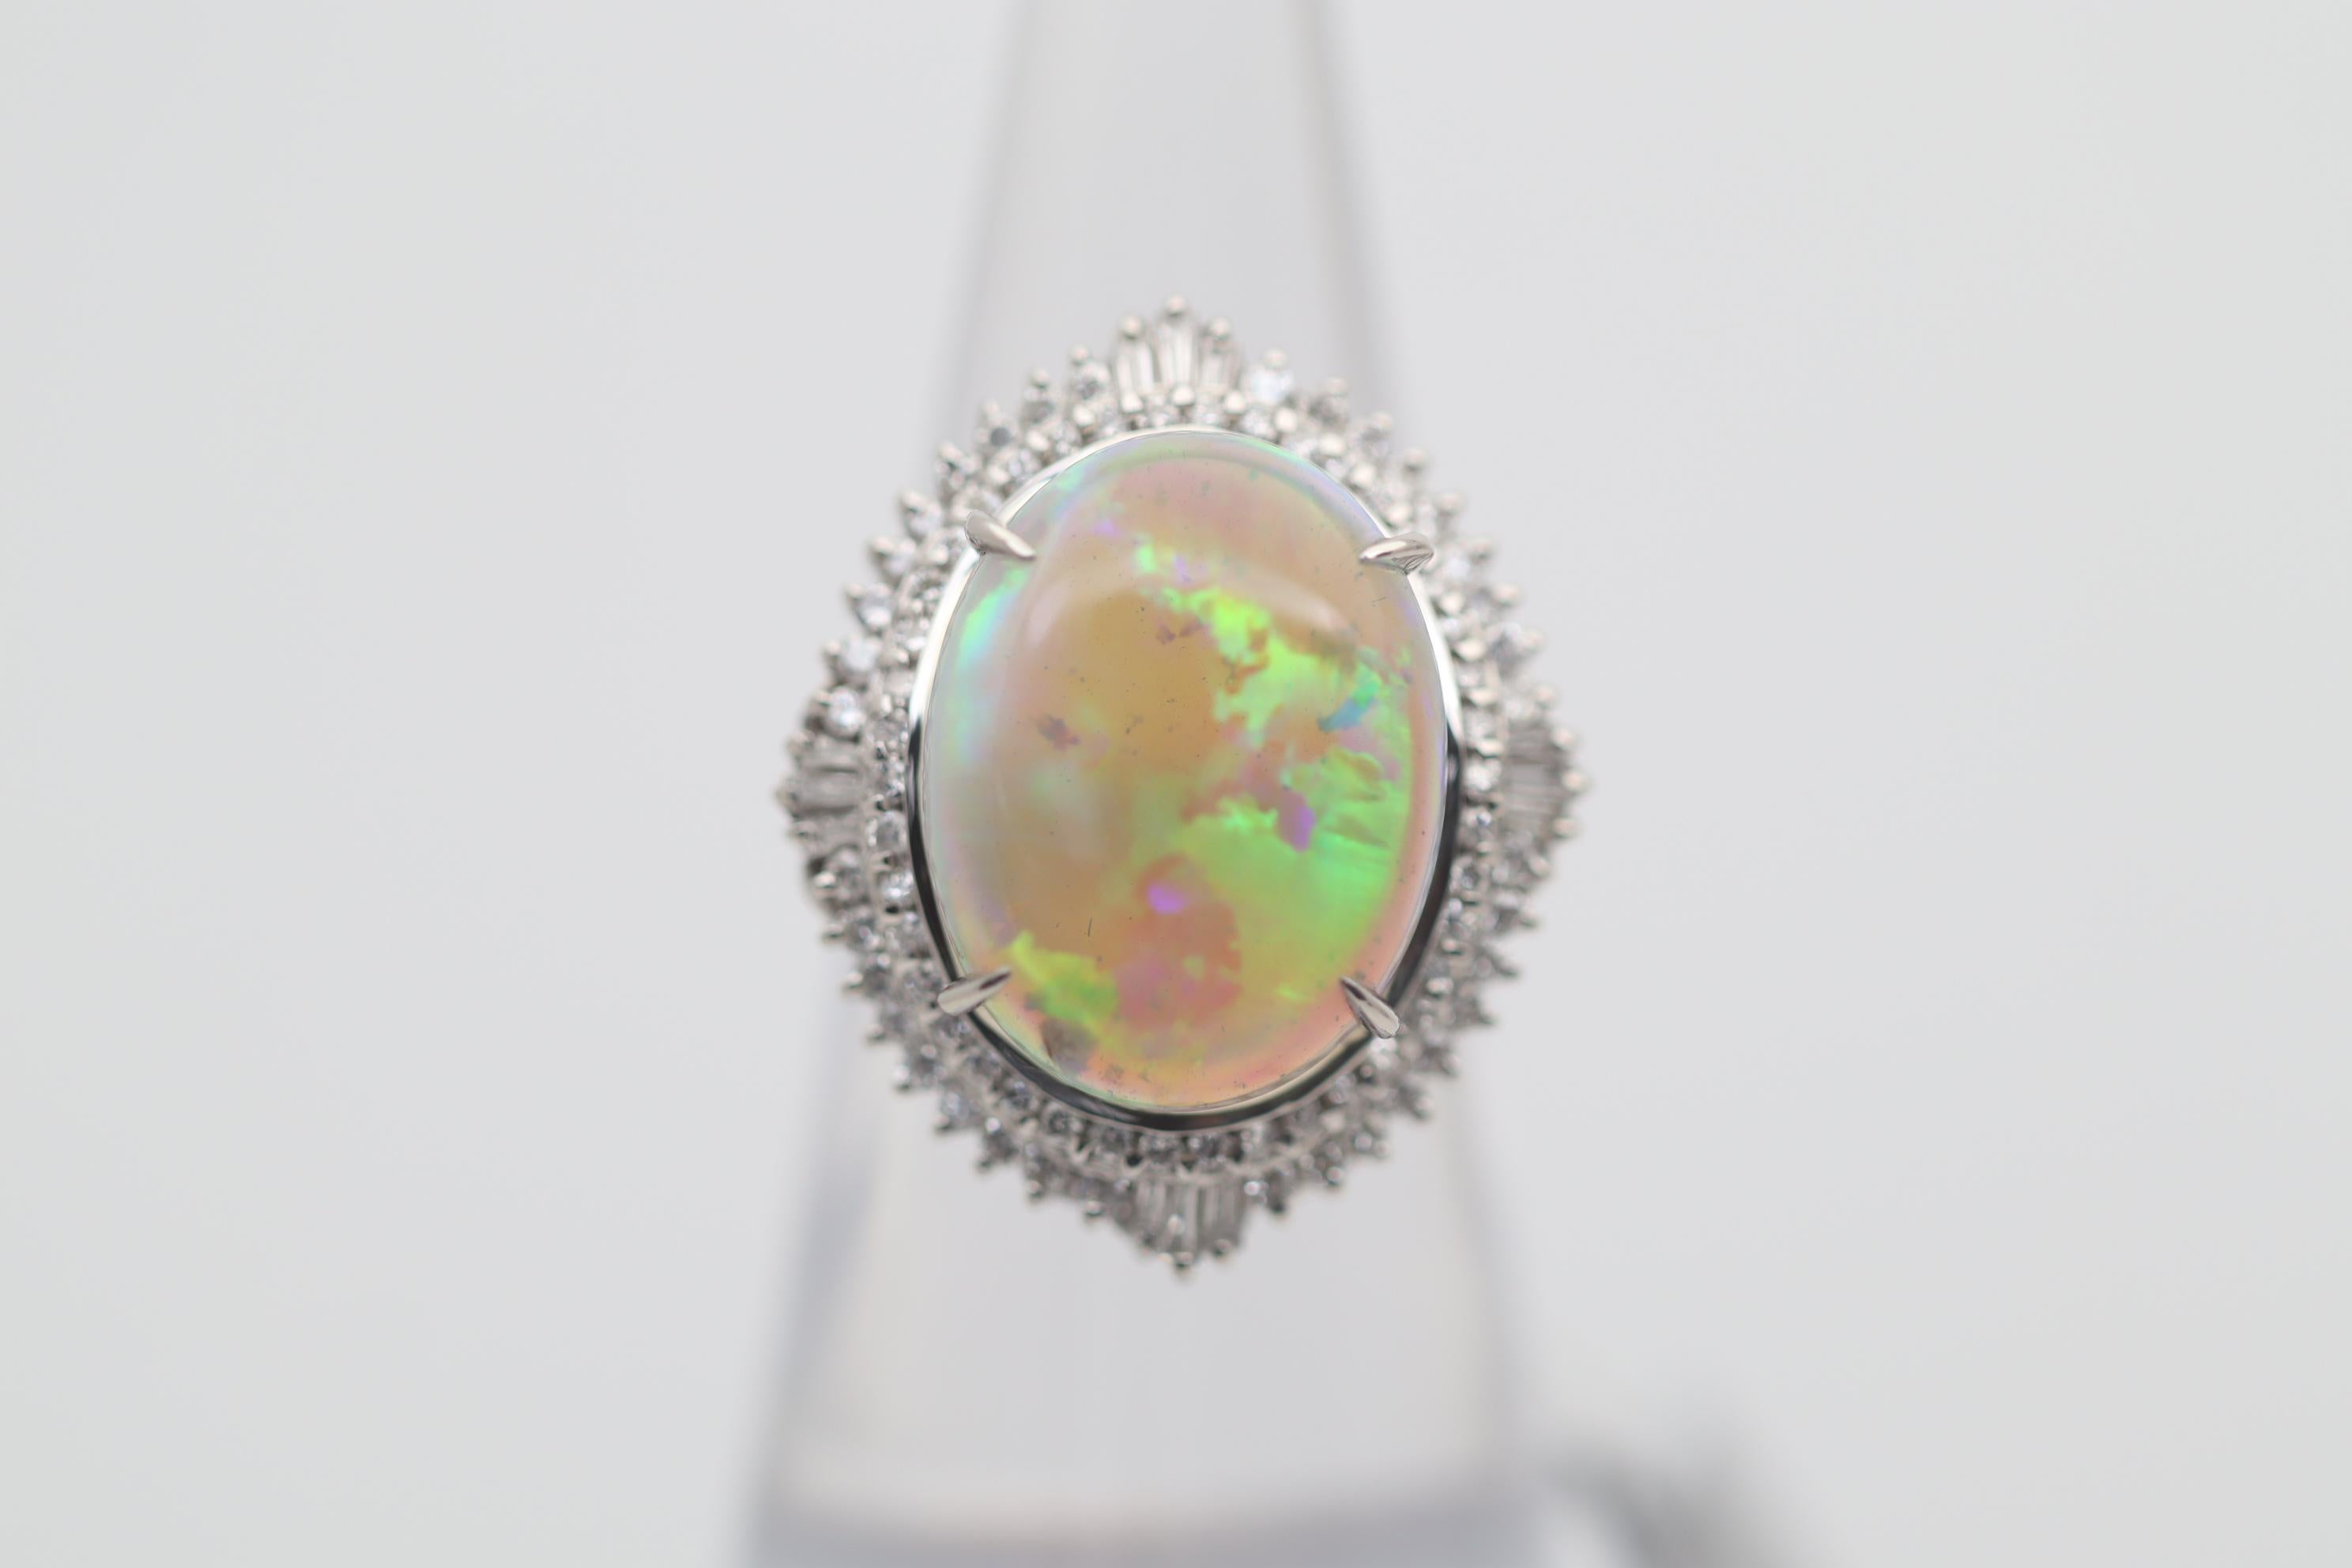 A large fine crystal opal from Australia weighing 5.97 carats. It has fantastic play-of-color as big bright flashes of green, blue, yellow roll across the stone. Surrounding the opal are 0.79 carats of round brilliant and baguette-cut diamonds set